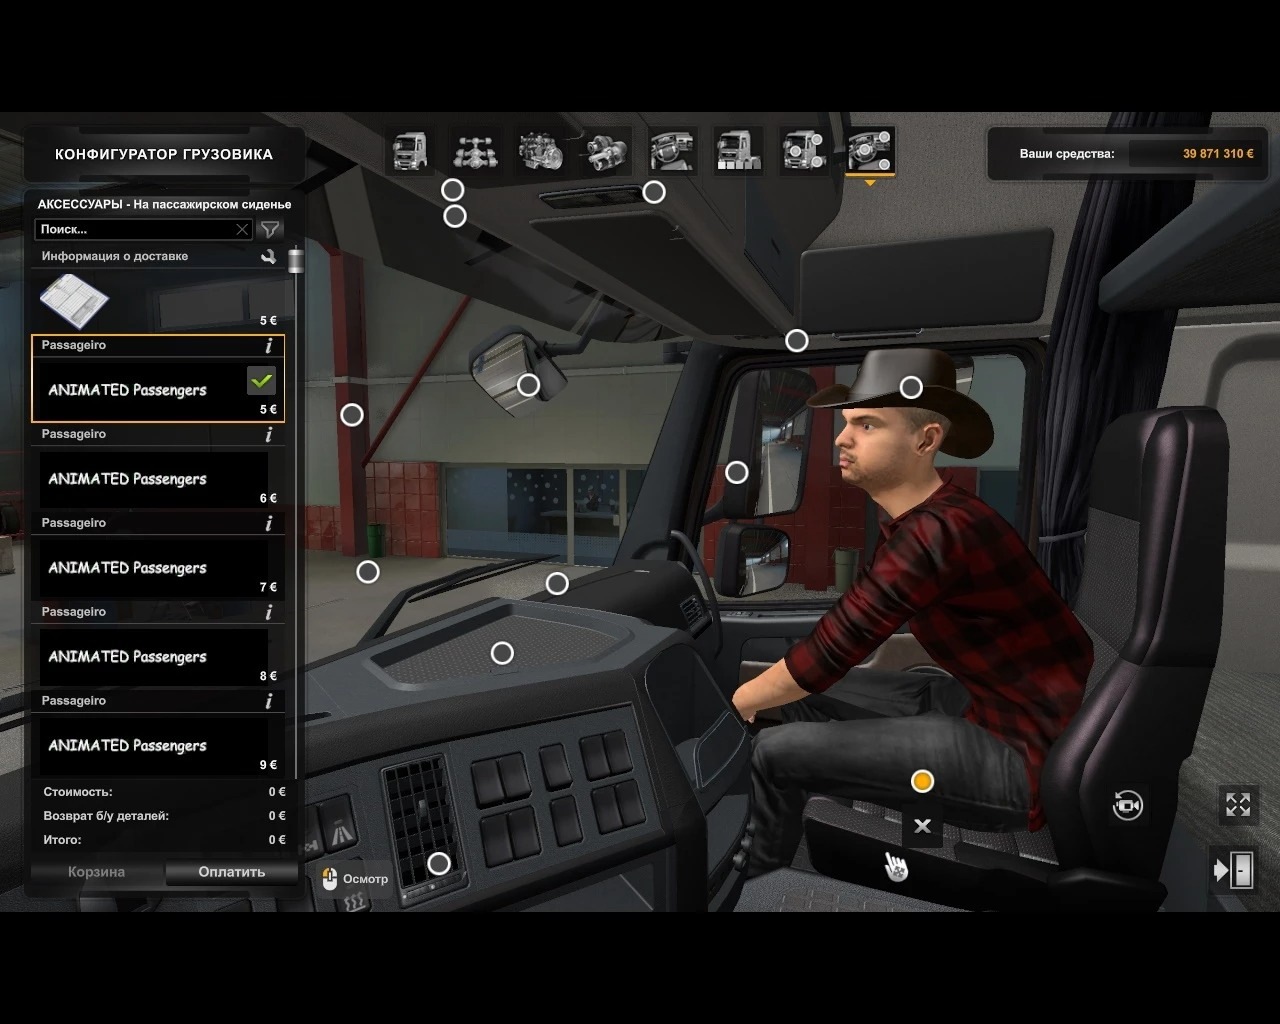 Animated Passengers 146 Ets 2 Mods Ets2 Map Euro Truck Simulator 2 Mods Download